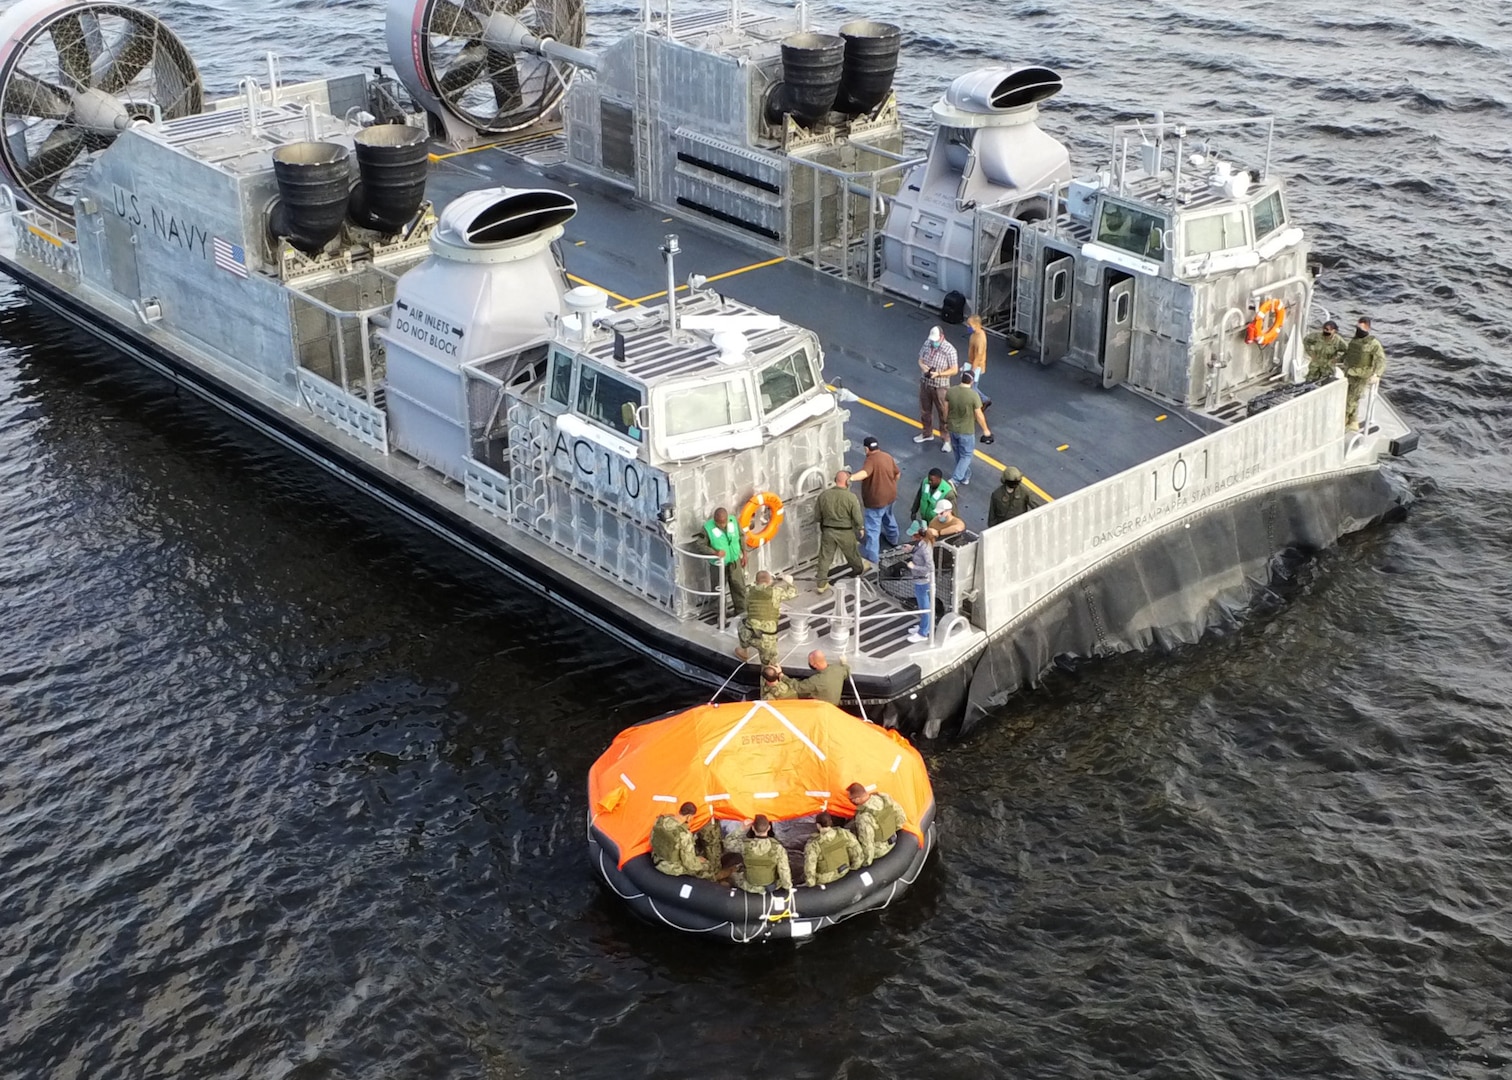 Reservists demonstrated the ability to safely deploy and board a 25-person life raft from the Landing Craft Air Cushion 100 Class in the event of an abandoned ship during a egress training Nov. 7-8.